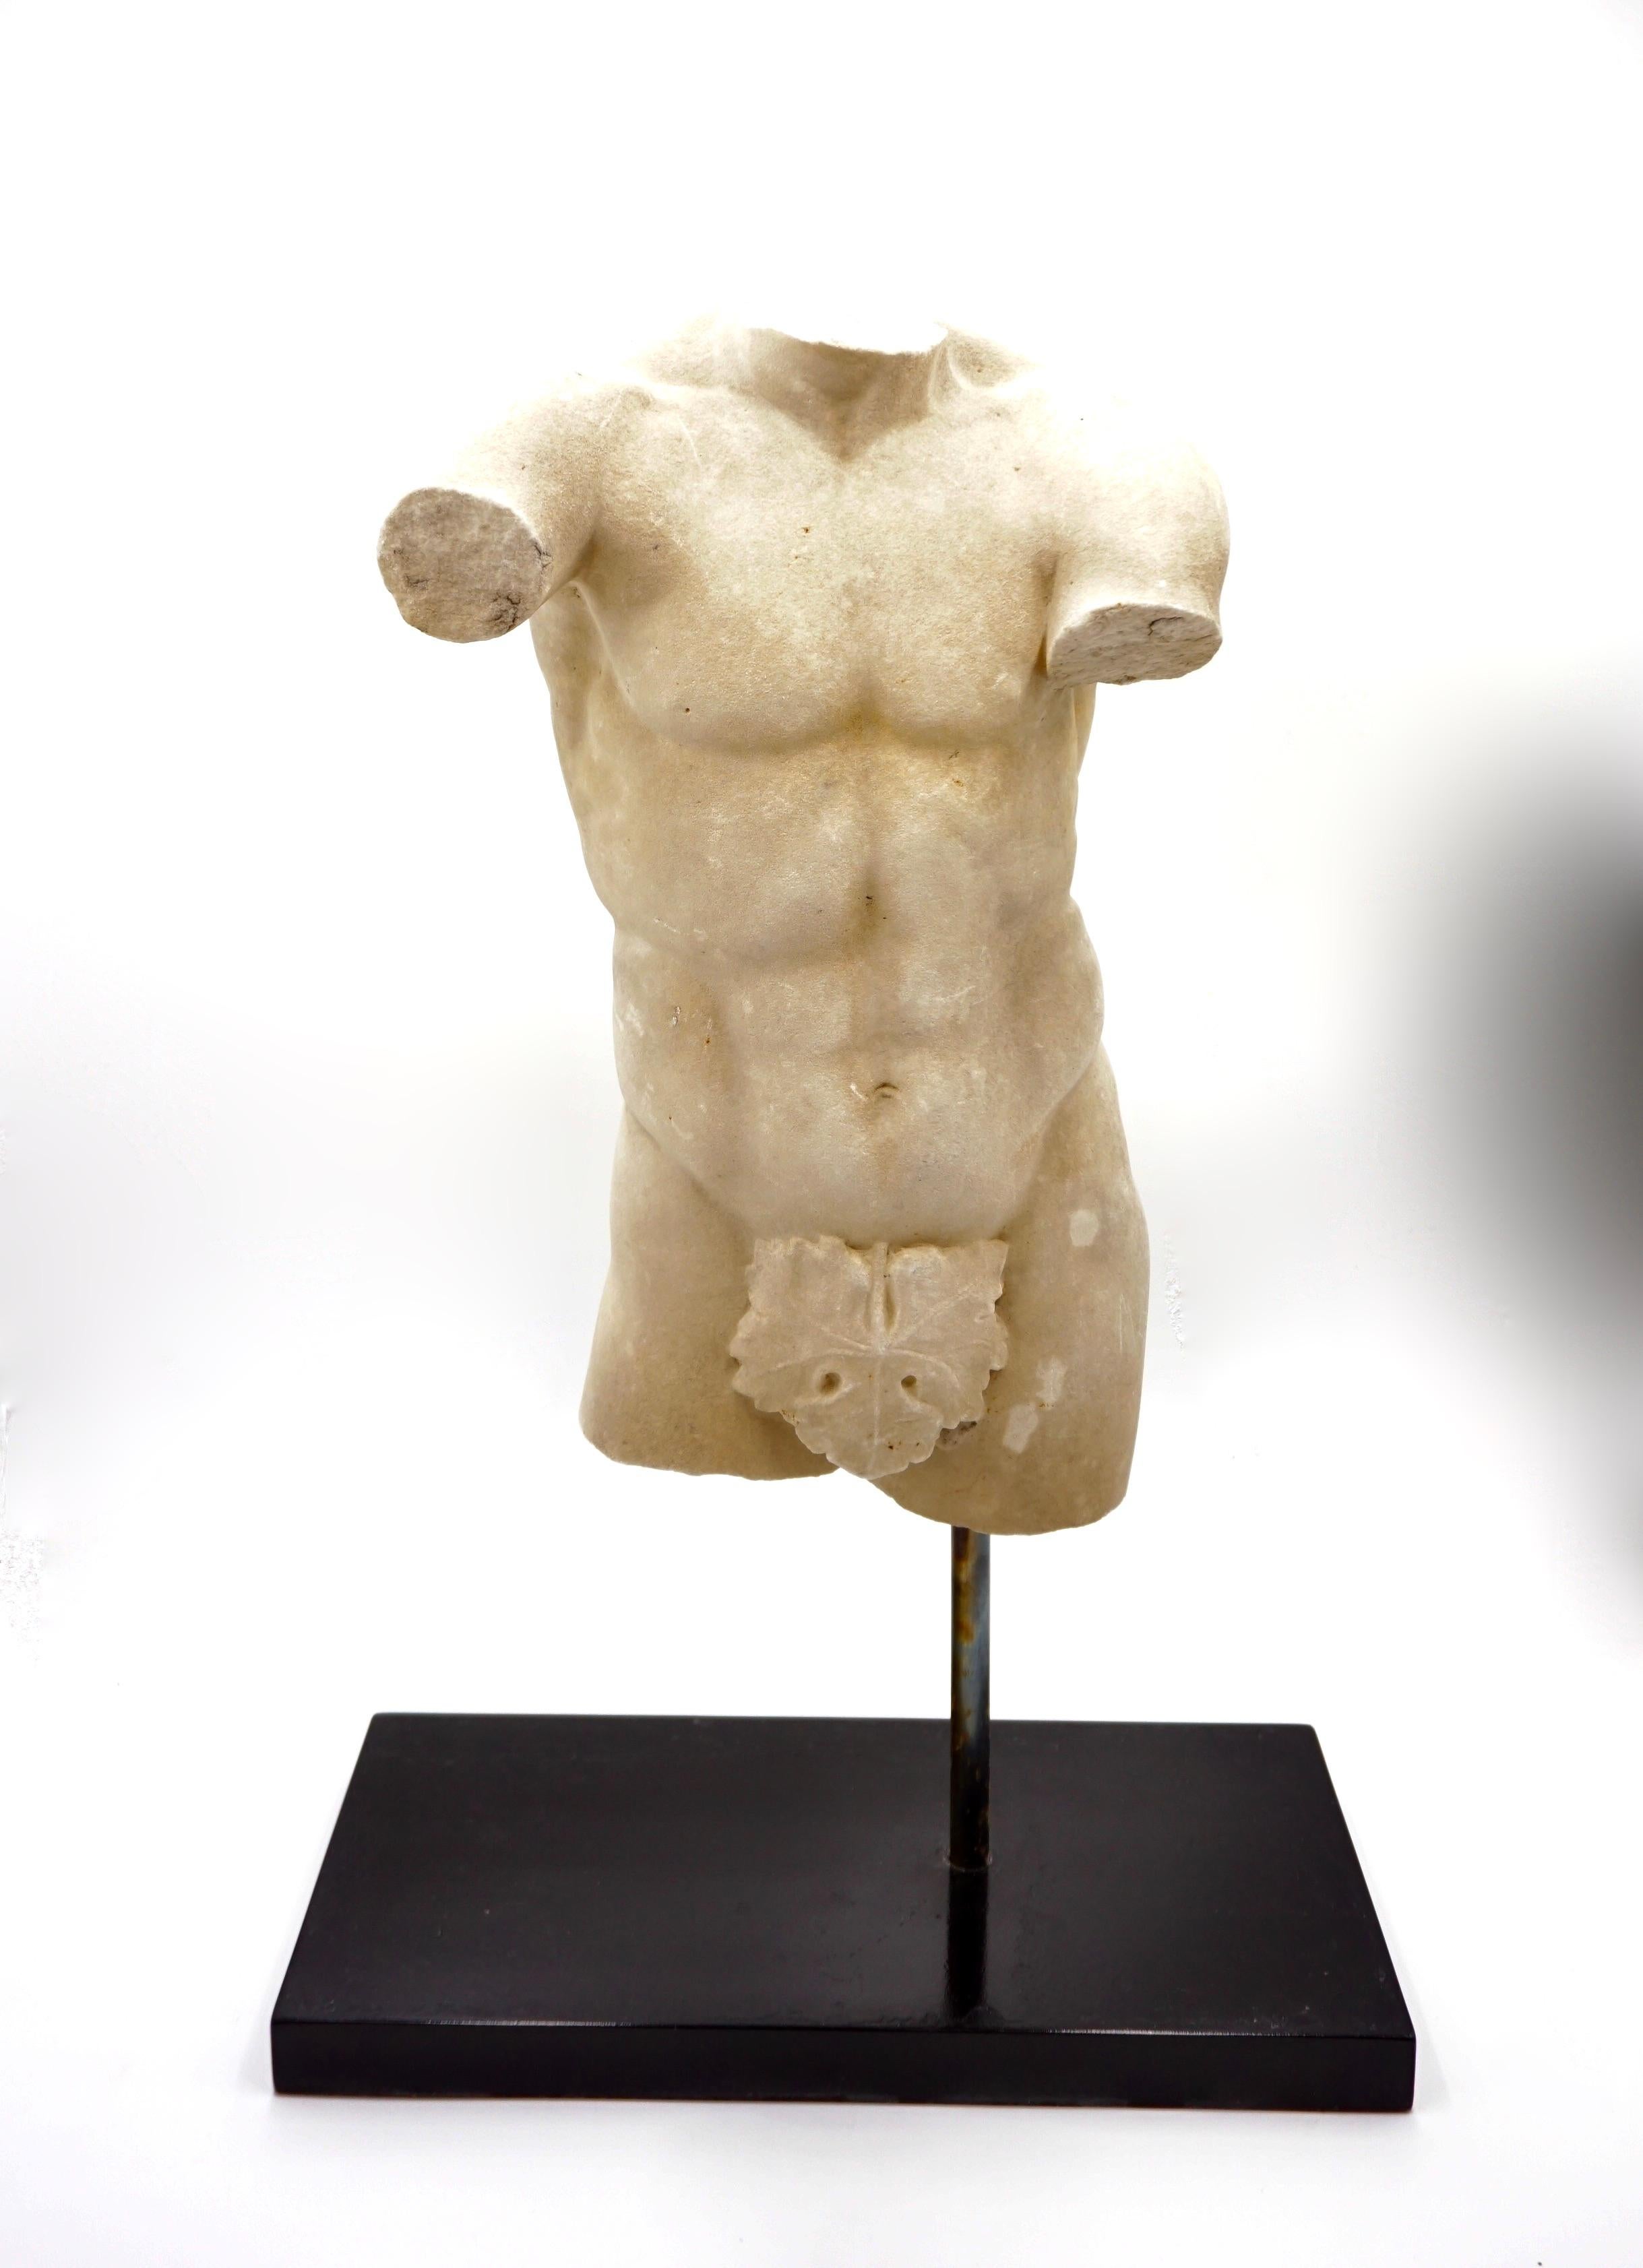 Antique male marble torso, circa 1850
A copy of the roman marble statue Apoxyomenus in Musei Vaticani in Rome (I sec d.c.) copy of a greek bronze athlete statue Apoxyomenos masterpiece of Lisippo about 320 a.c. 
As is typical of Lisippo's works,